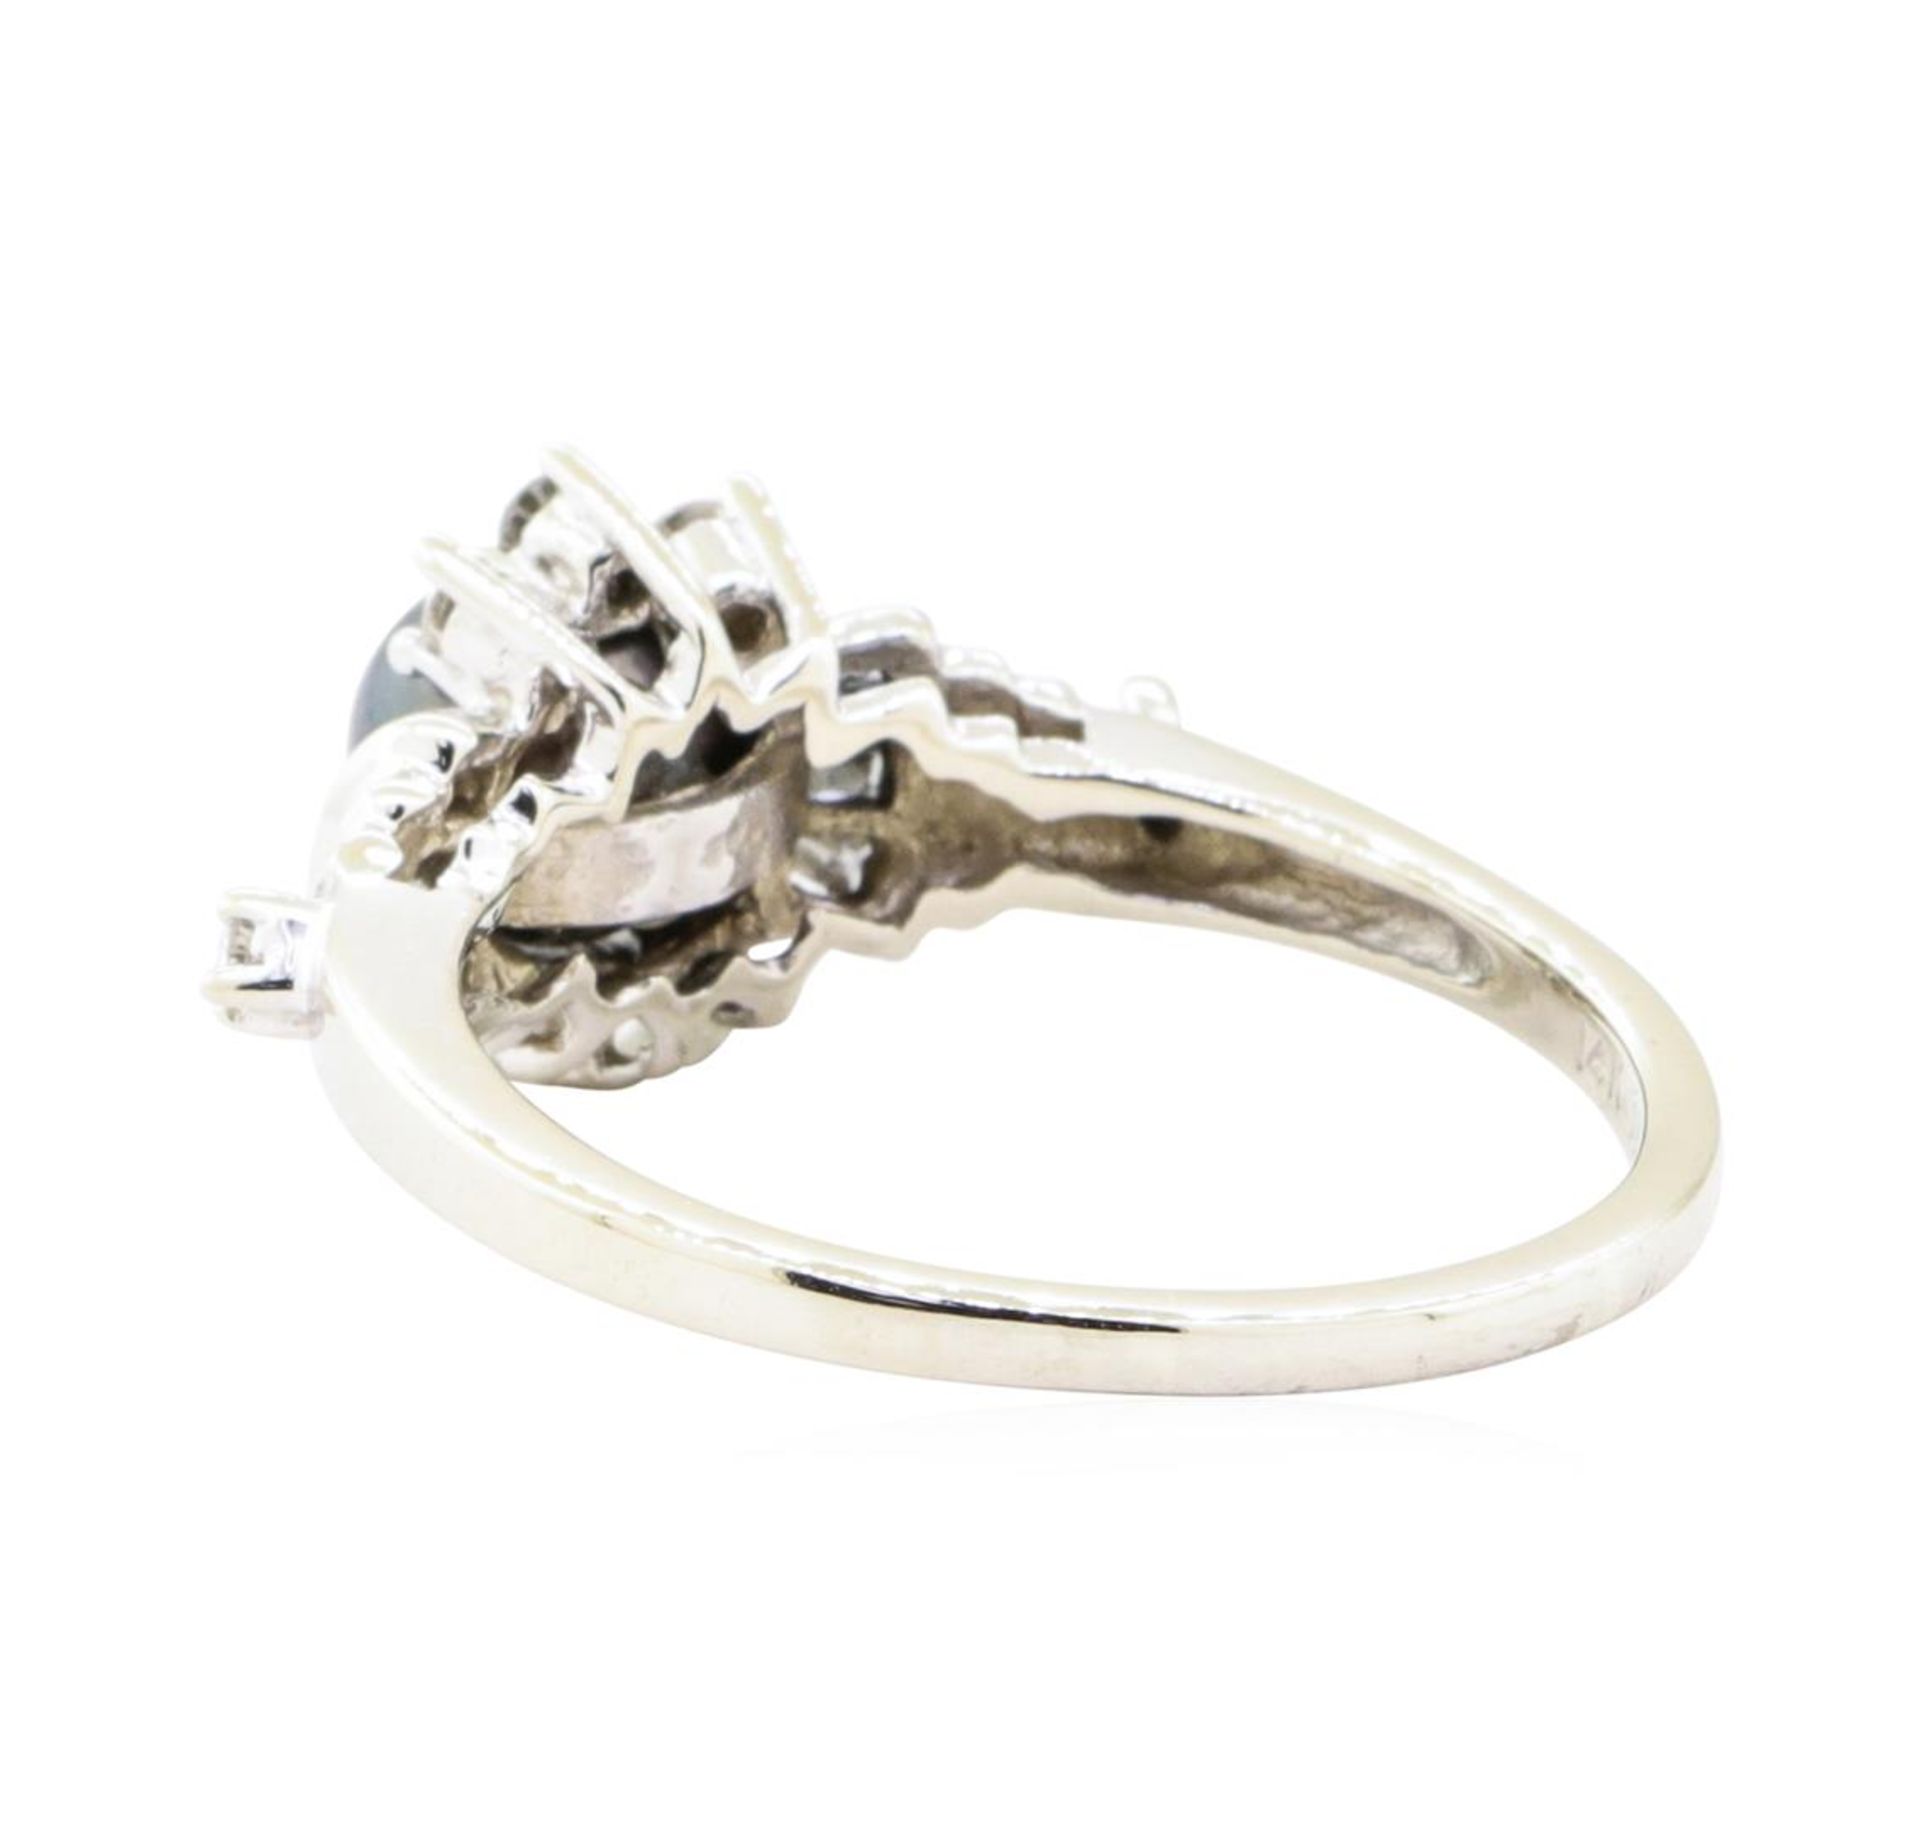 0.40 ctw Diamond and 7mm Dyed Black Pearl Ring - 14KT White Gold - Image 3 of 4